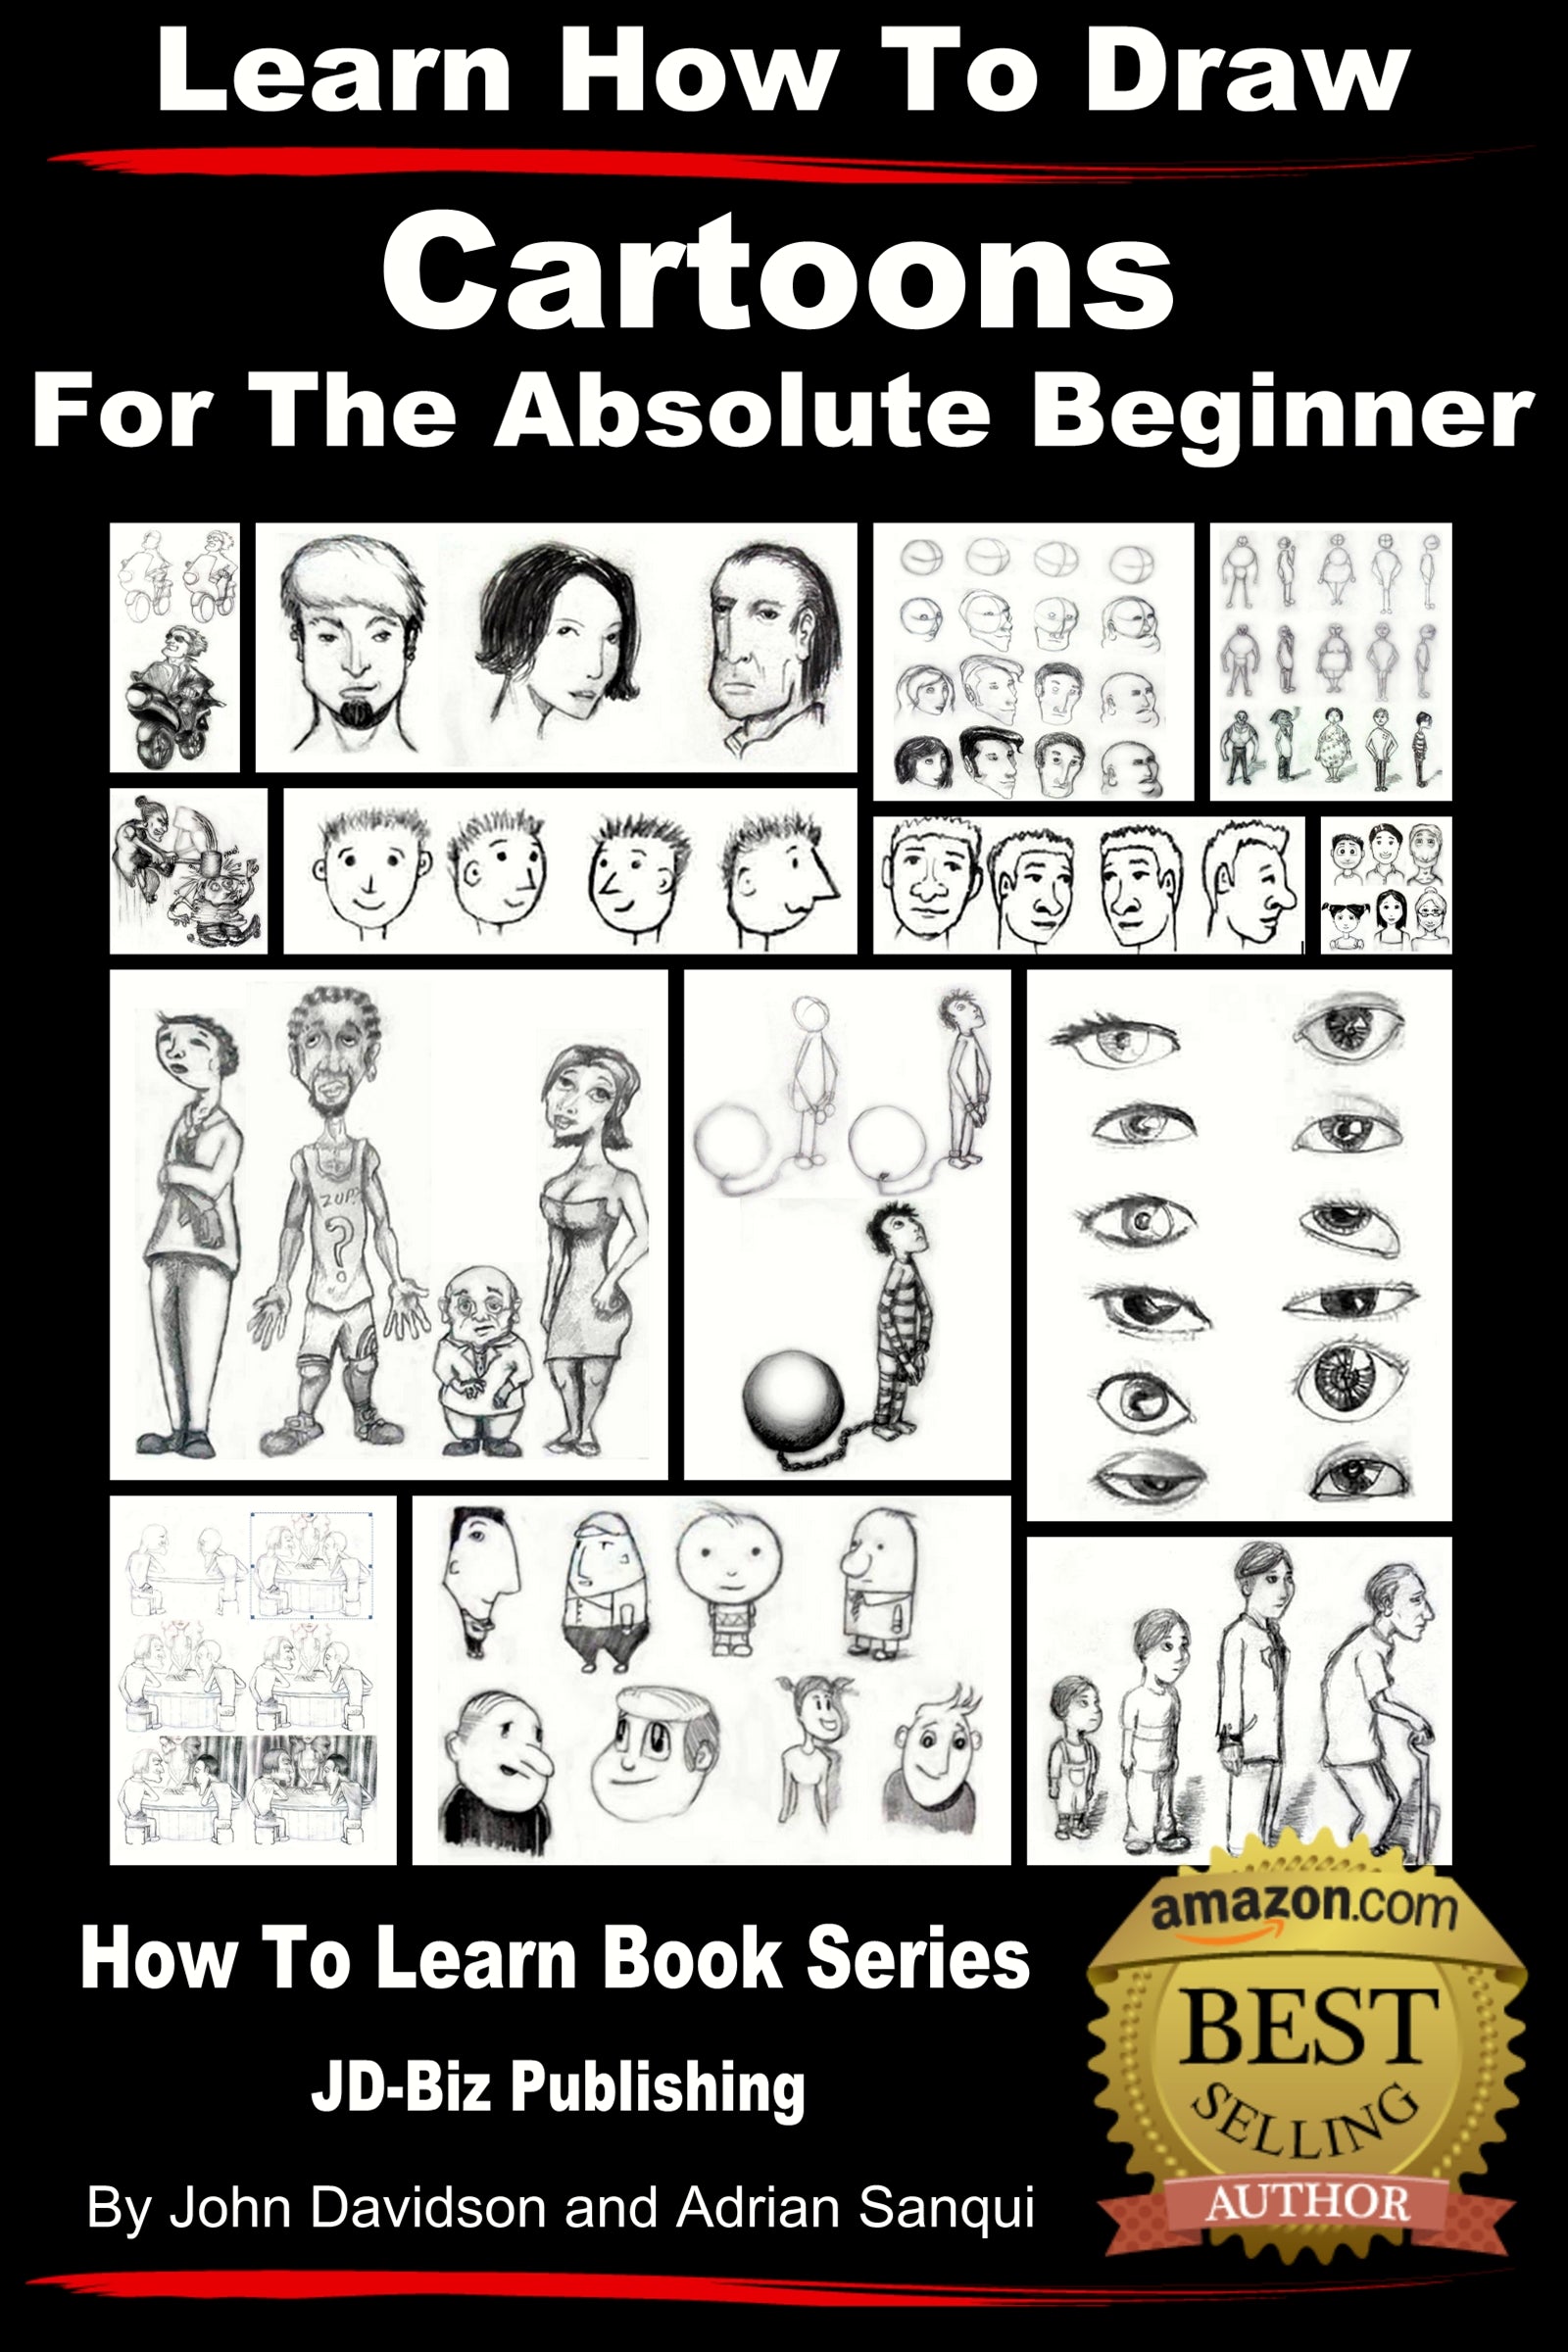 Learn How to Draw Cartoons - For the Absolute Beginner – Learn to